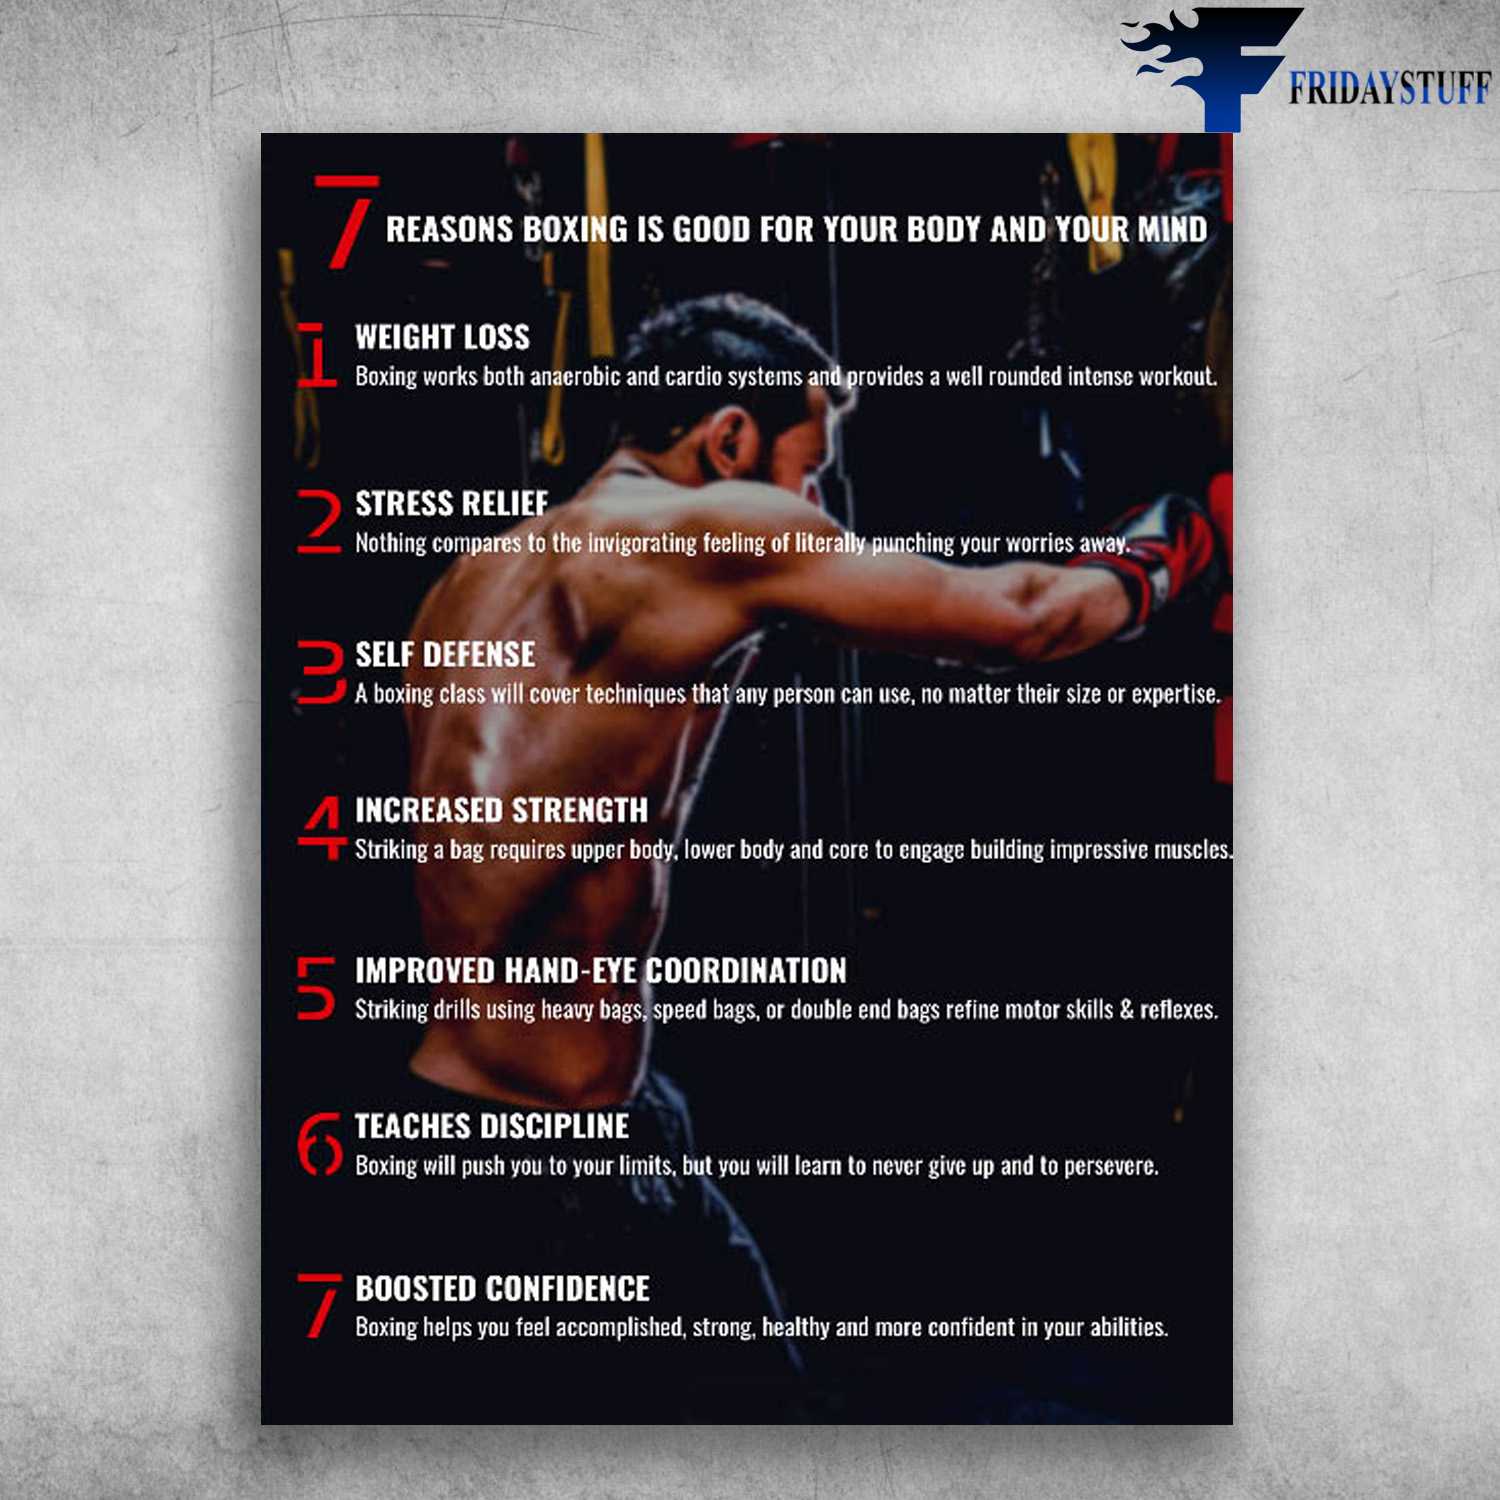 Boxing Poster - 7 Reasons Boxing Is Good, For Your Body And Your Mind, Wieght Loss, Stress Relife, Self Defensee, Increased Strength, Improved Hand-Eye Coordination